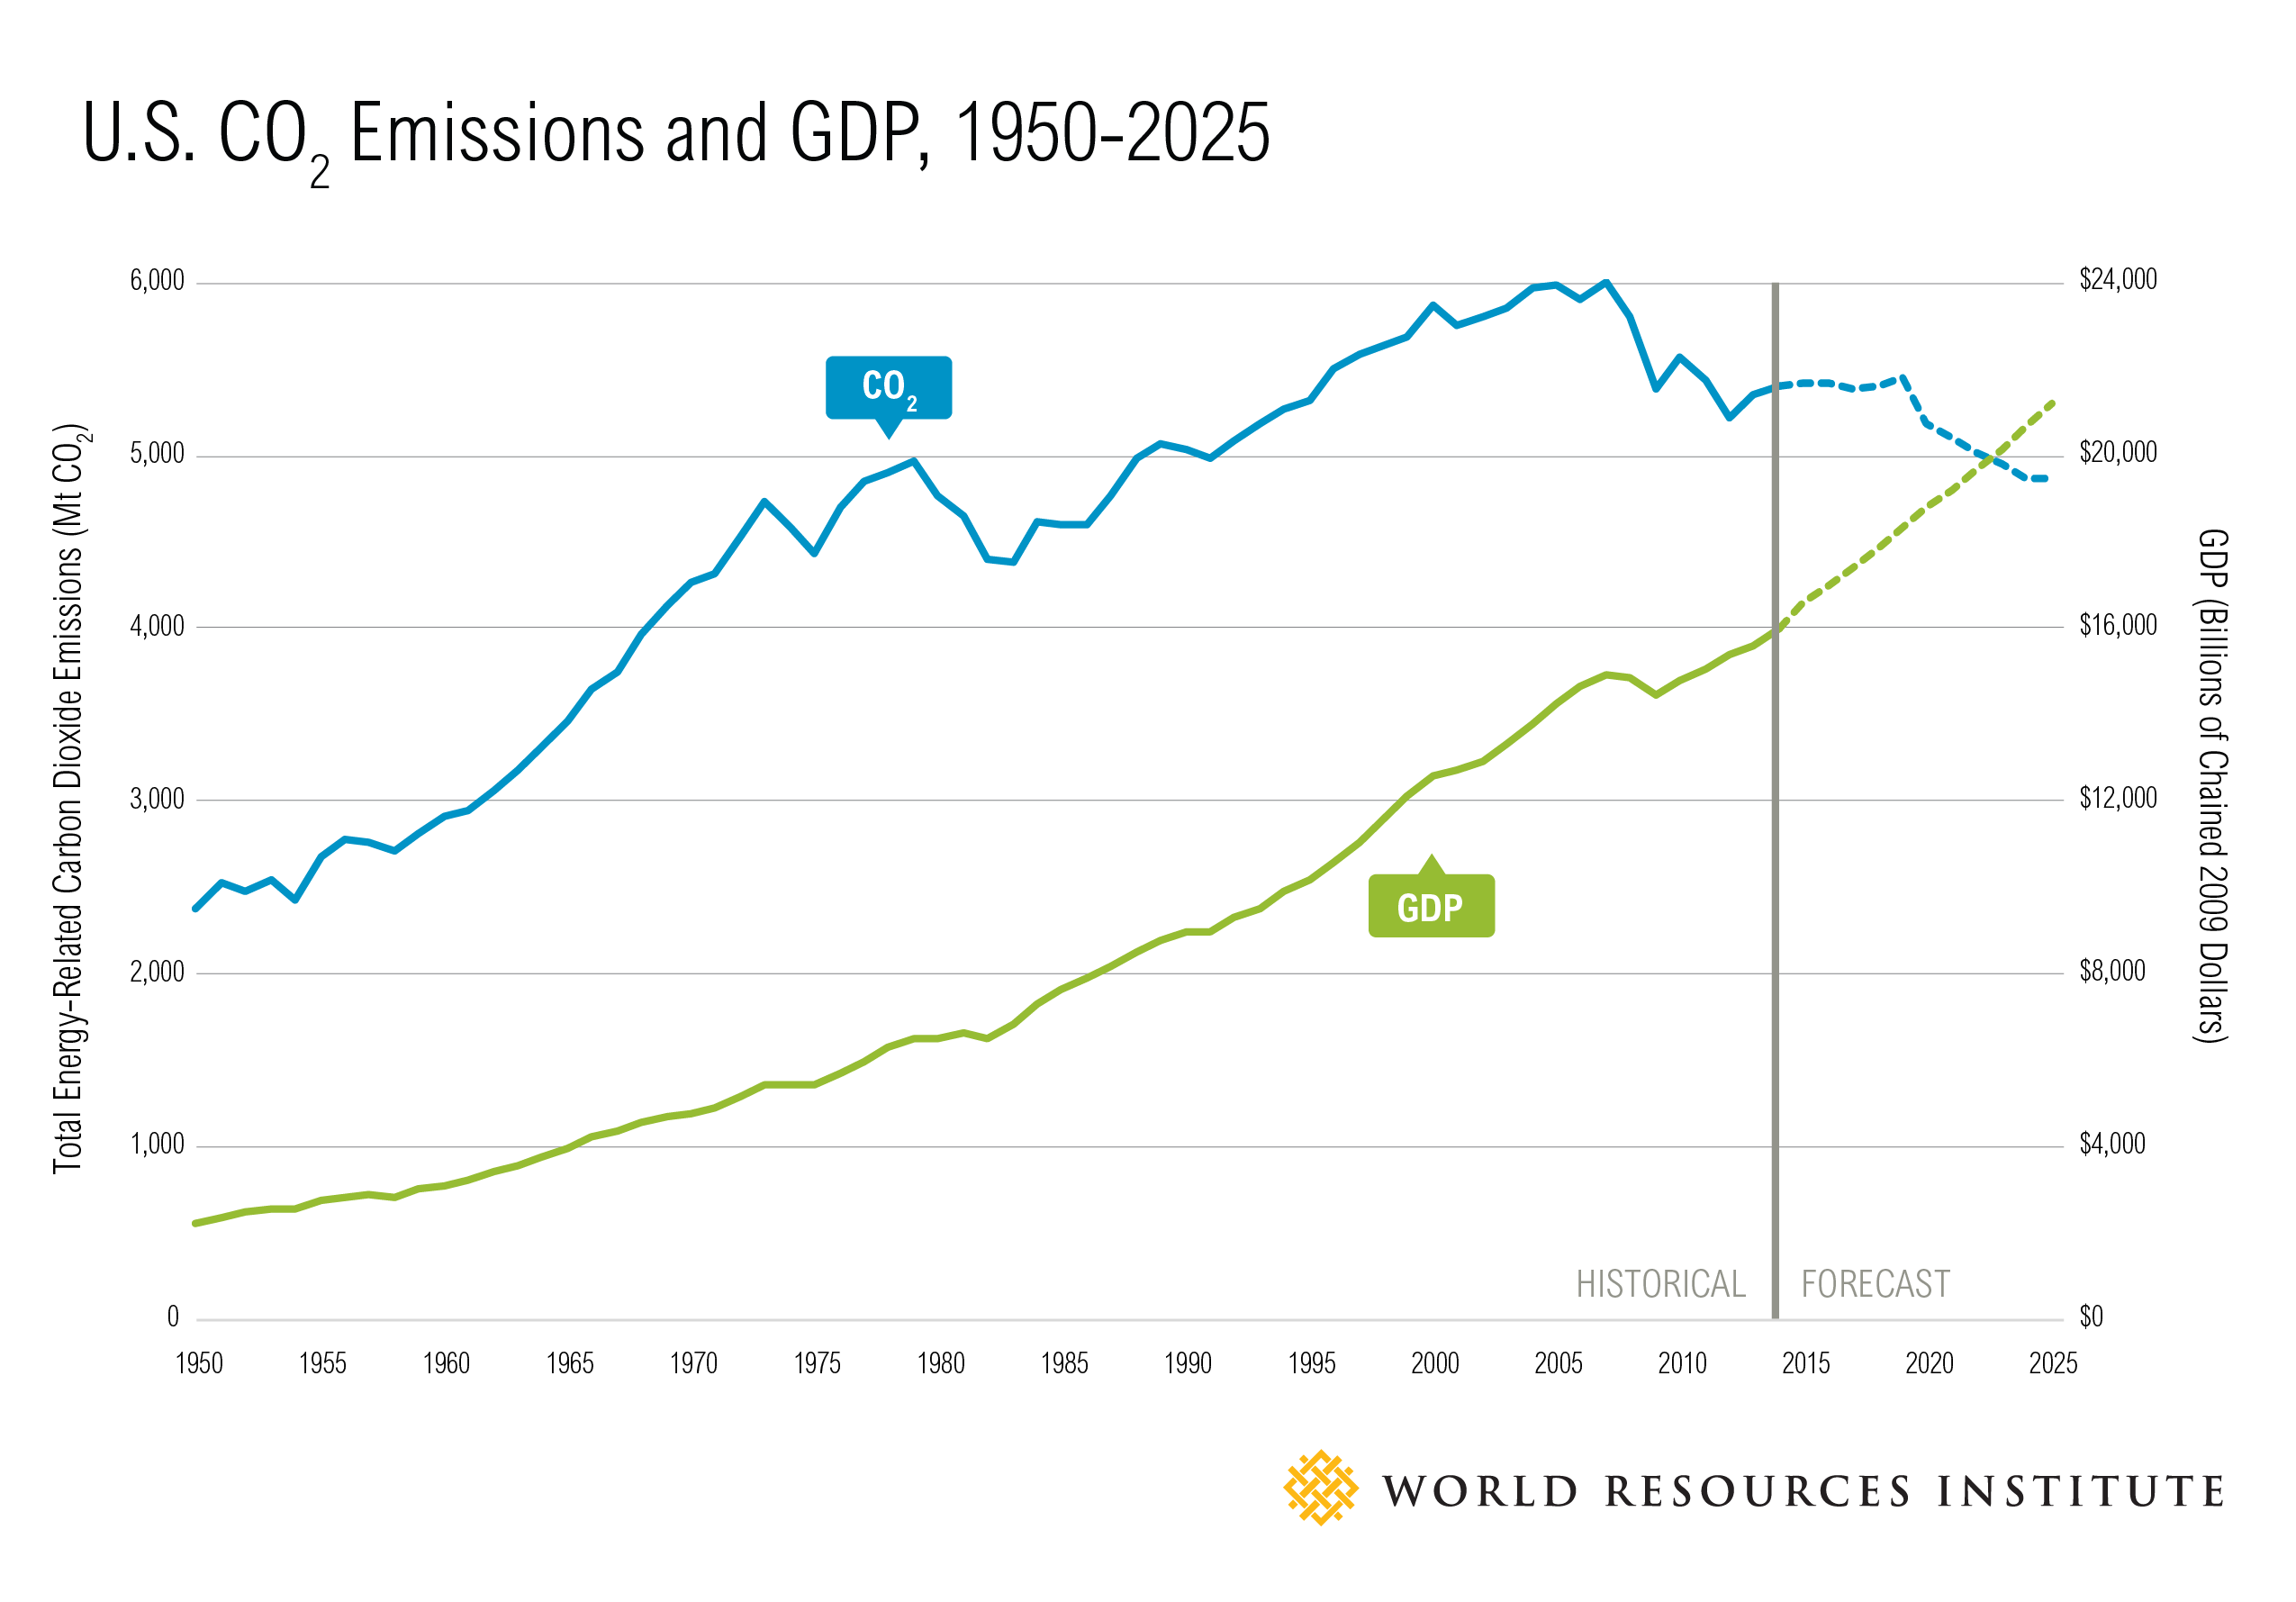 21 Countries Are Reducing Carbon Emissions While Growing GDP